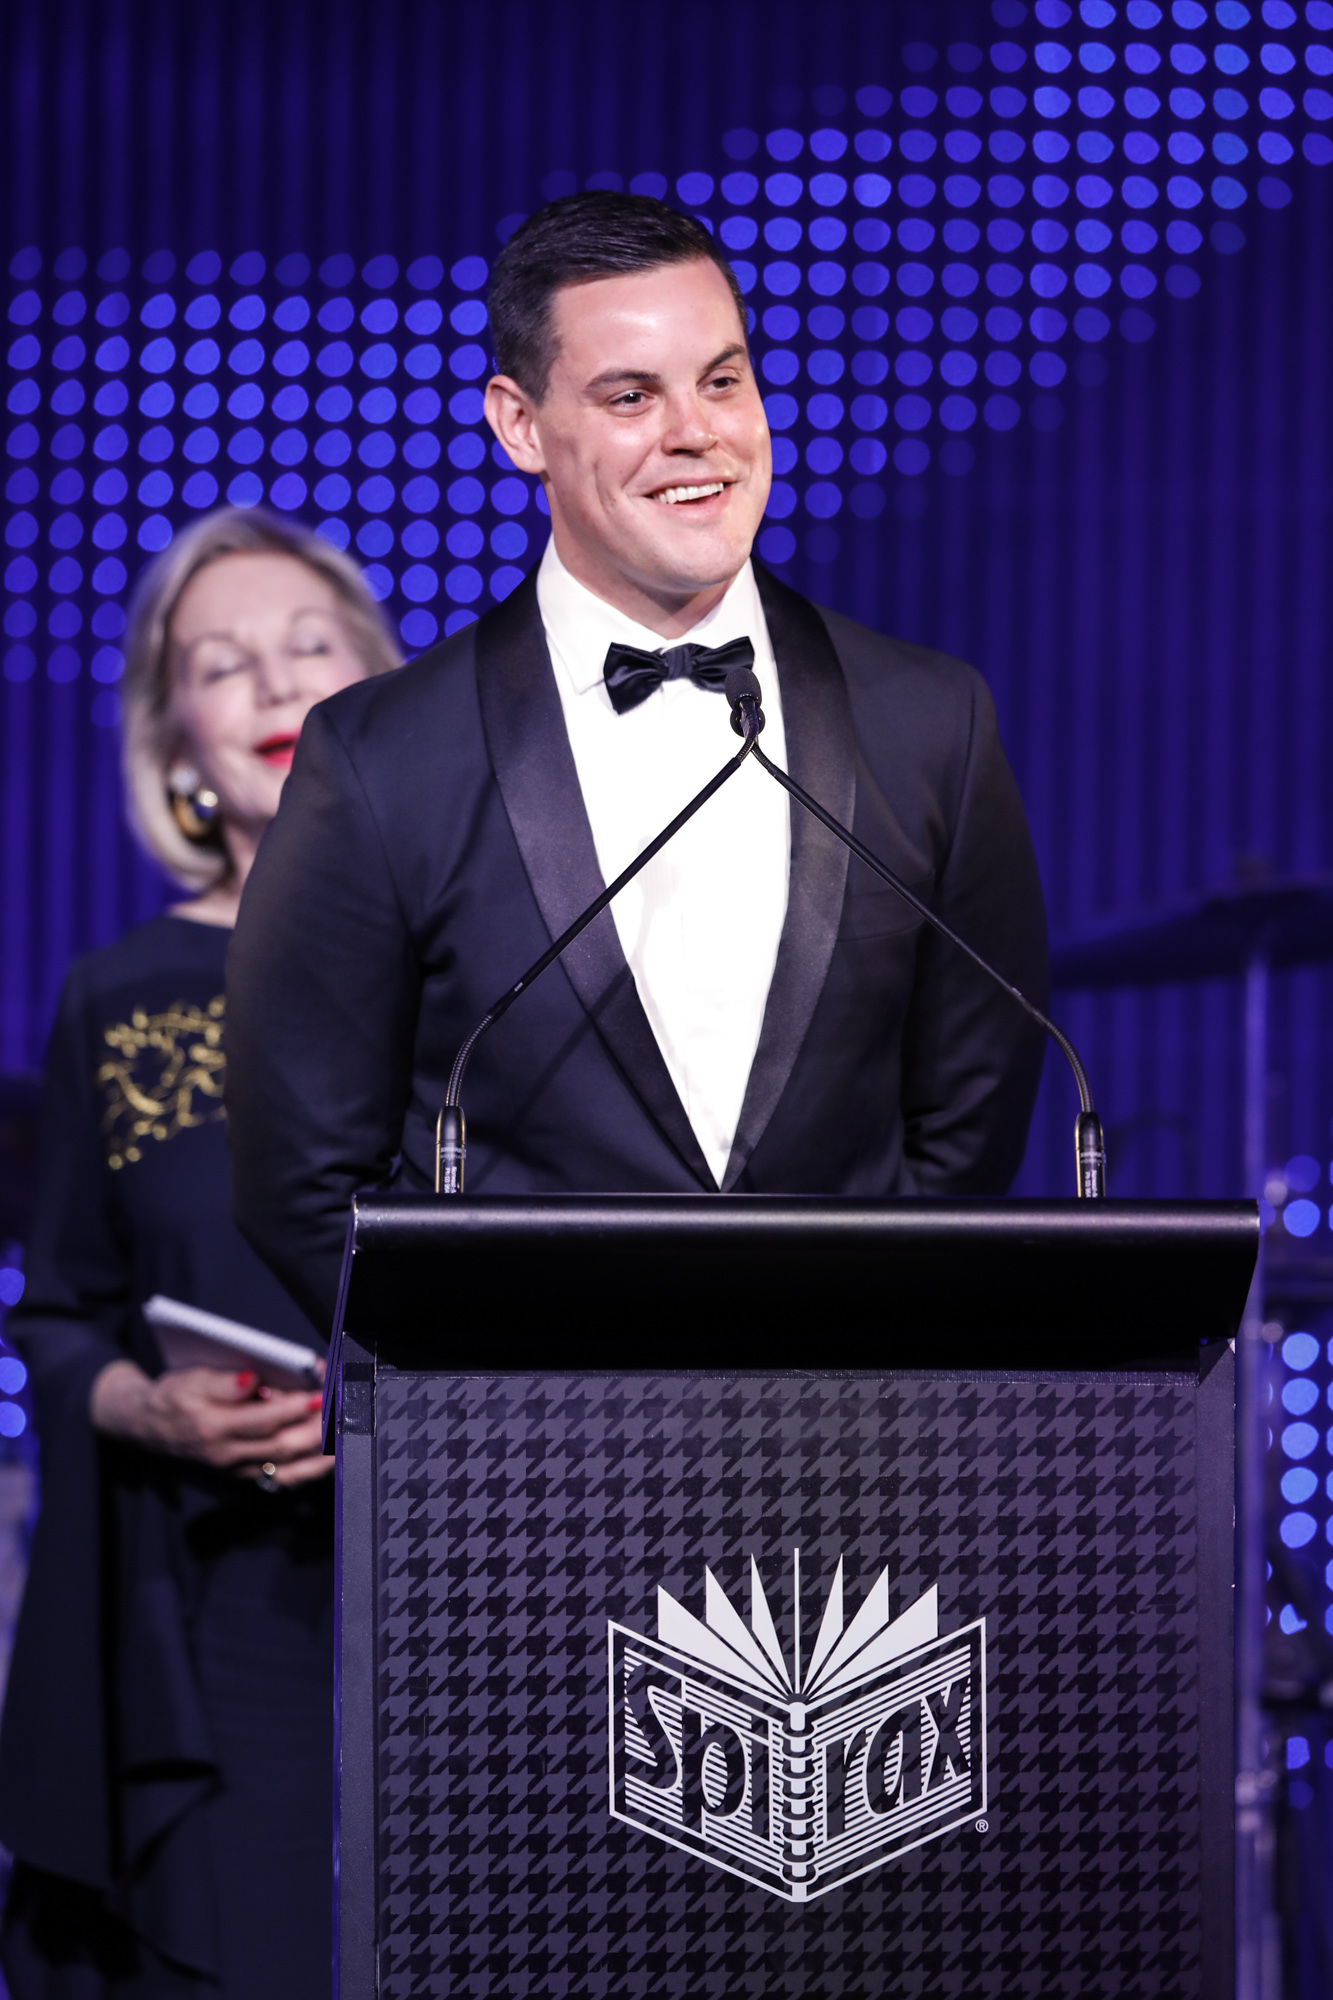   Chris O’Keefe accepting his award for  Journalist of the Year    PHOTO: The Kennedy Awards 